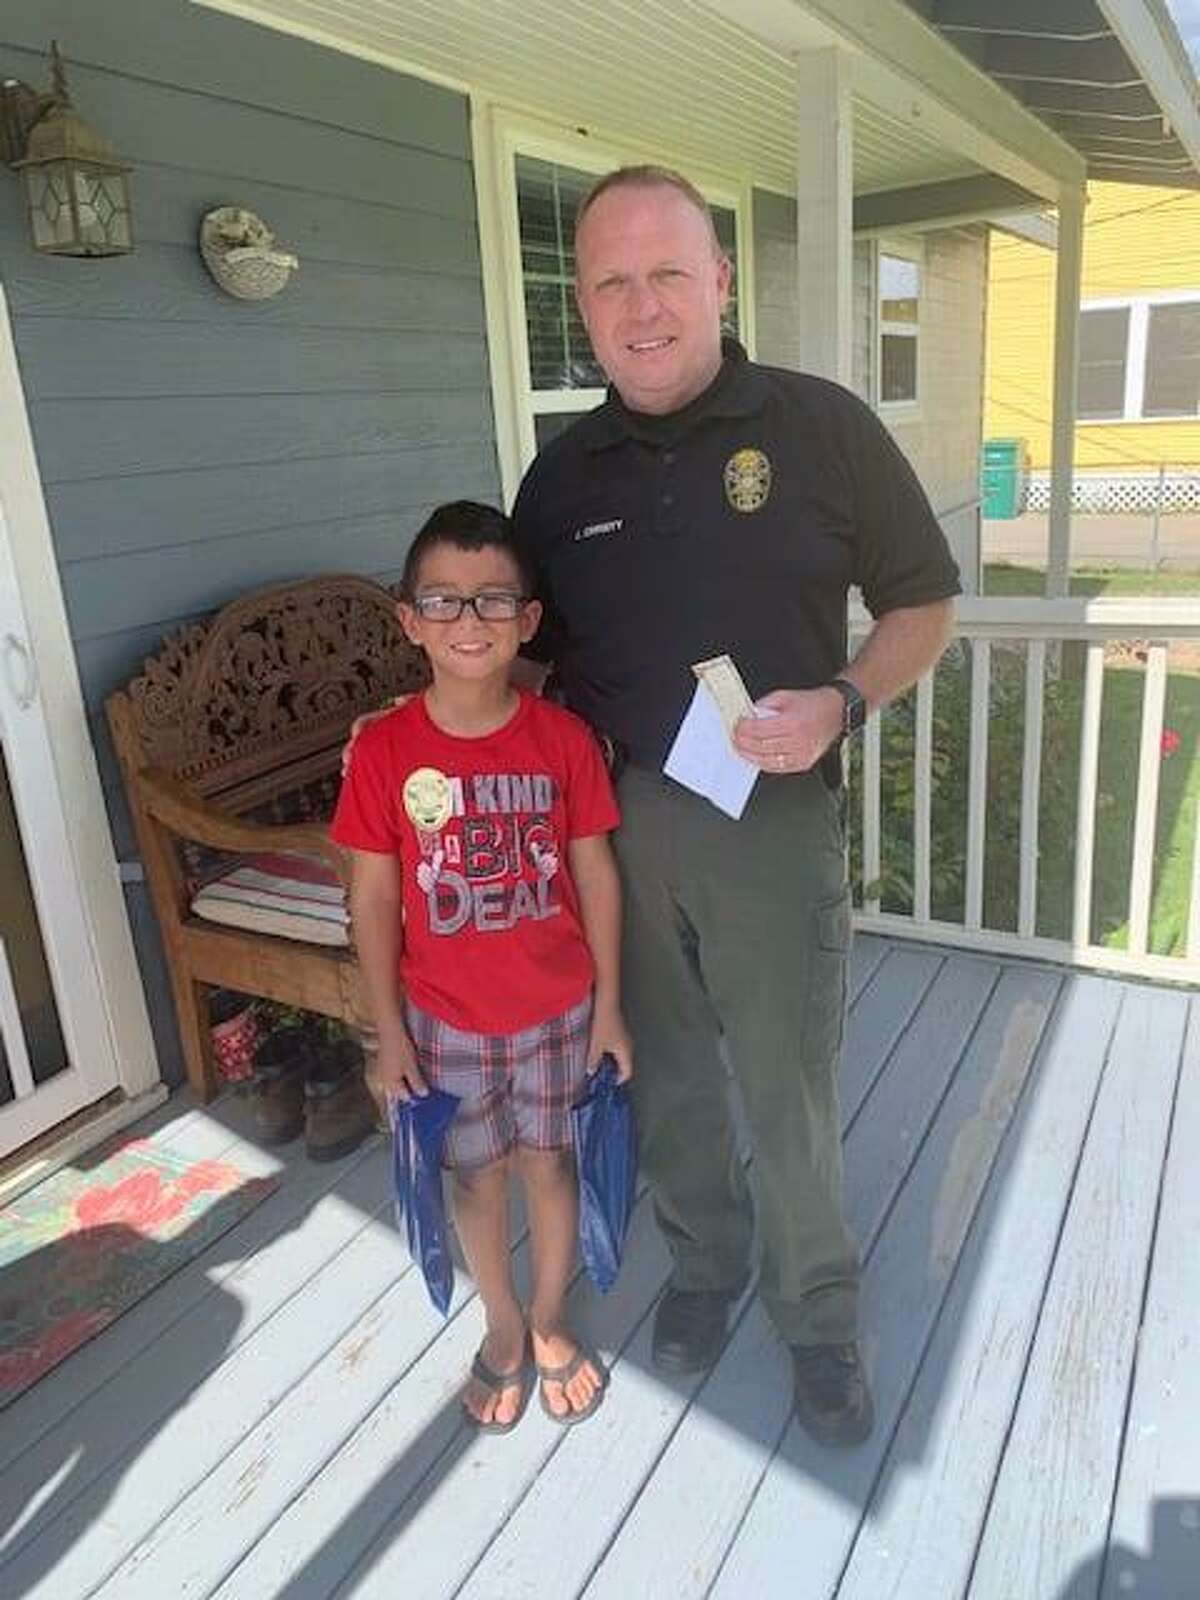 David Jimenez and Conroe Police Chief Jeff Christy pose for a Aug. 27 picture outside the 7-year-old's home in Conroe. The second grader wrote a letter sending police thanks for their work.